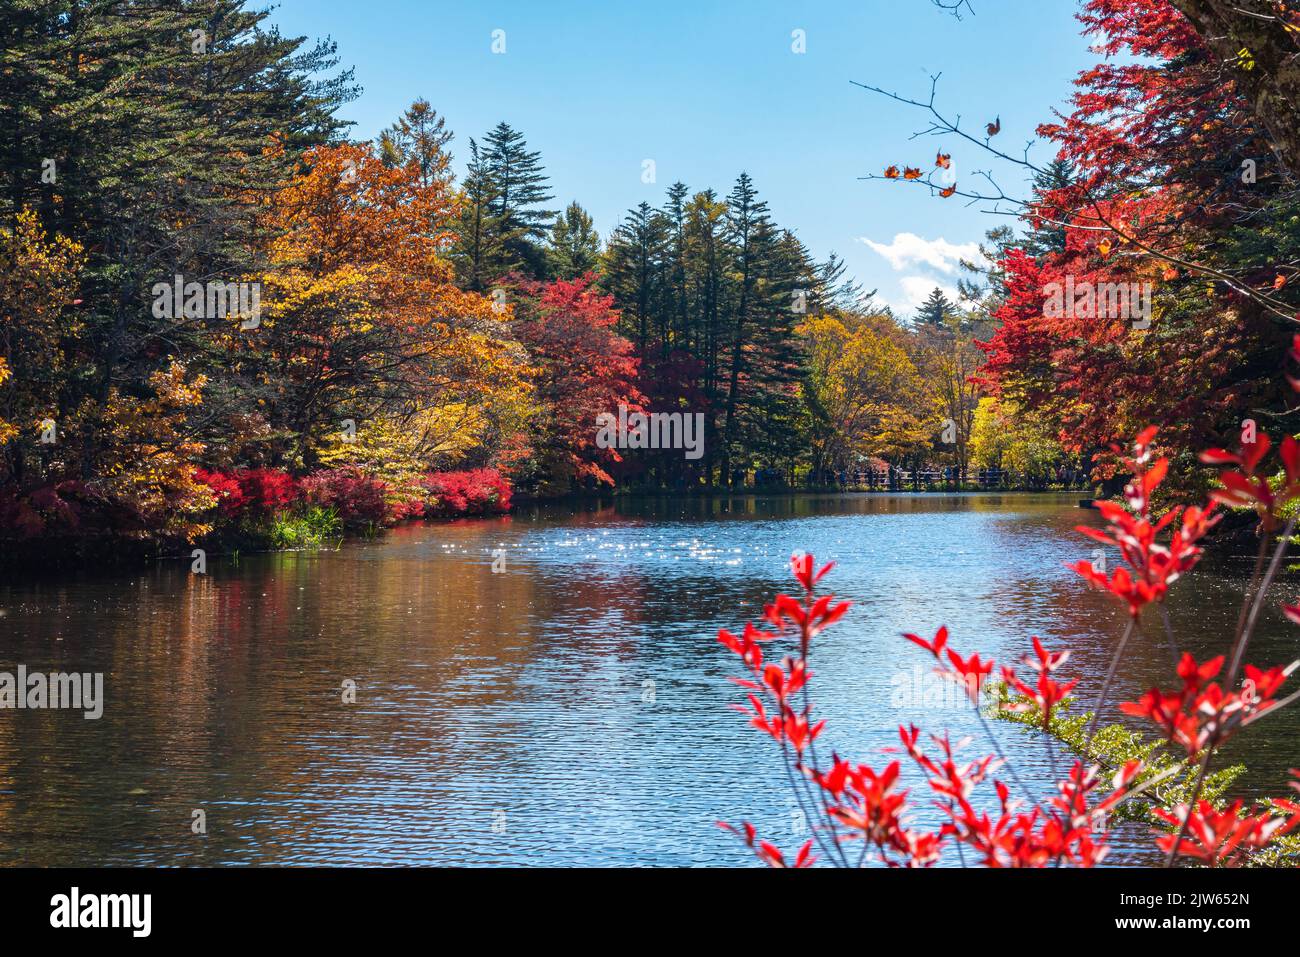 Kumobaike Pond autumn foliage scenery view, multicolor reflecting on surface in sunny day. Nagano Prefecture, Japan Stock Photo